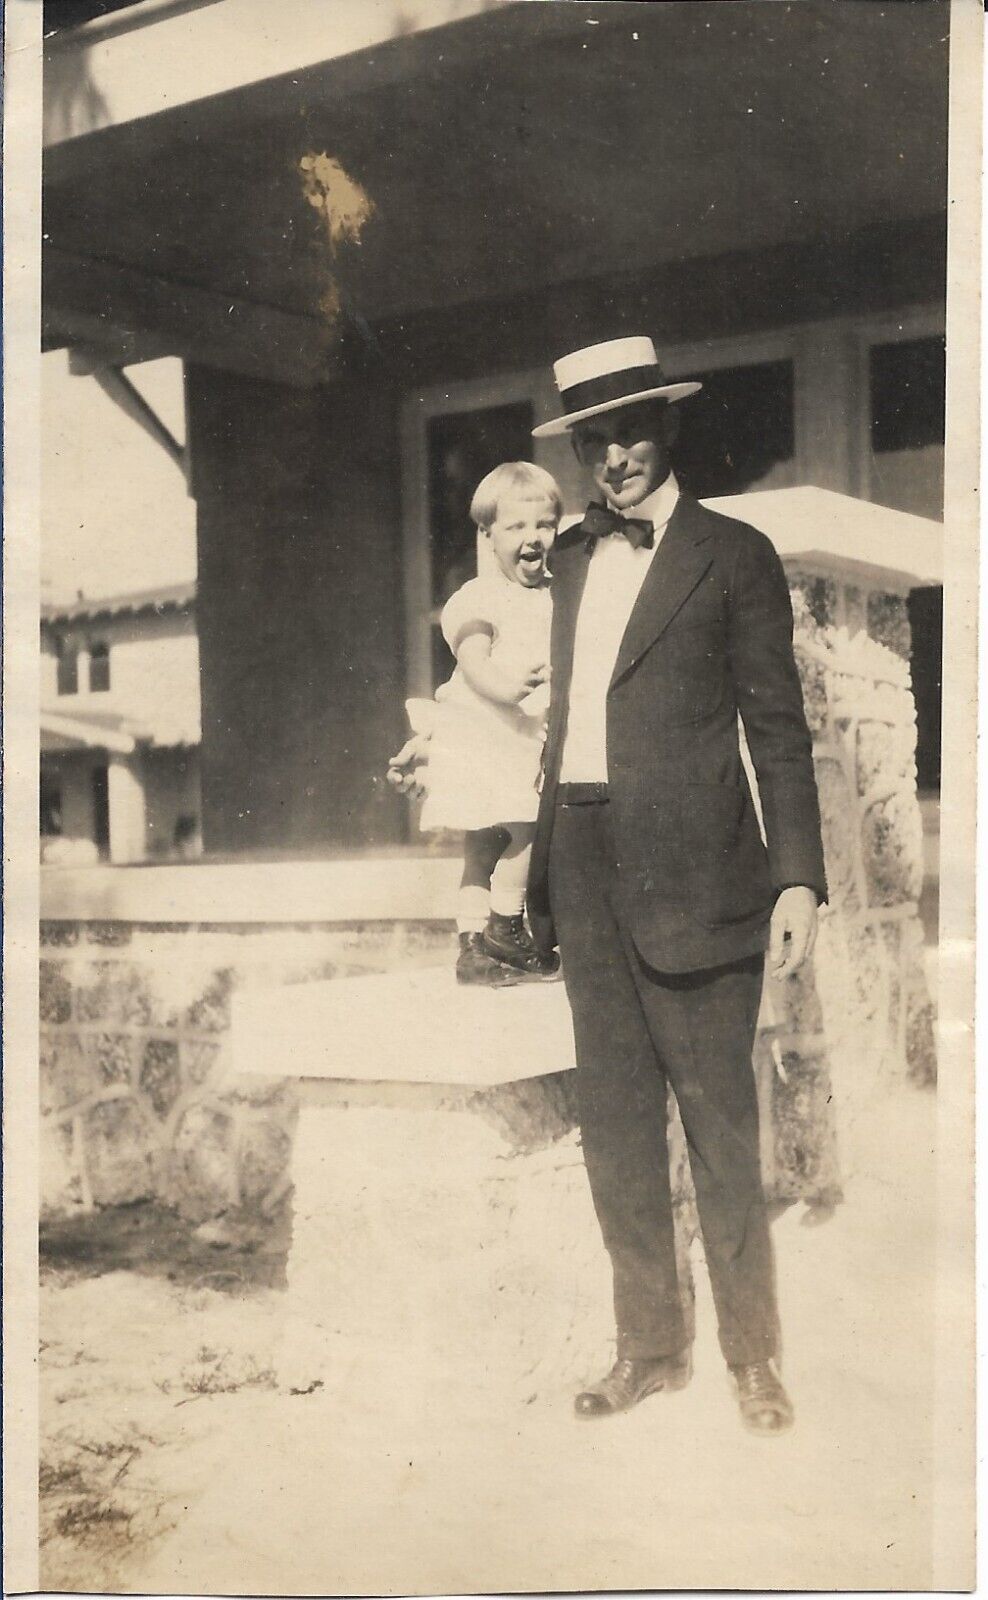 Man Baby Photograph 1930s Vintage Straw Boater Hat Outdoors House 3 3/8 x 5 3/8